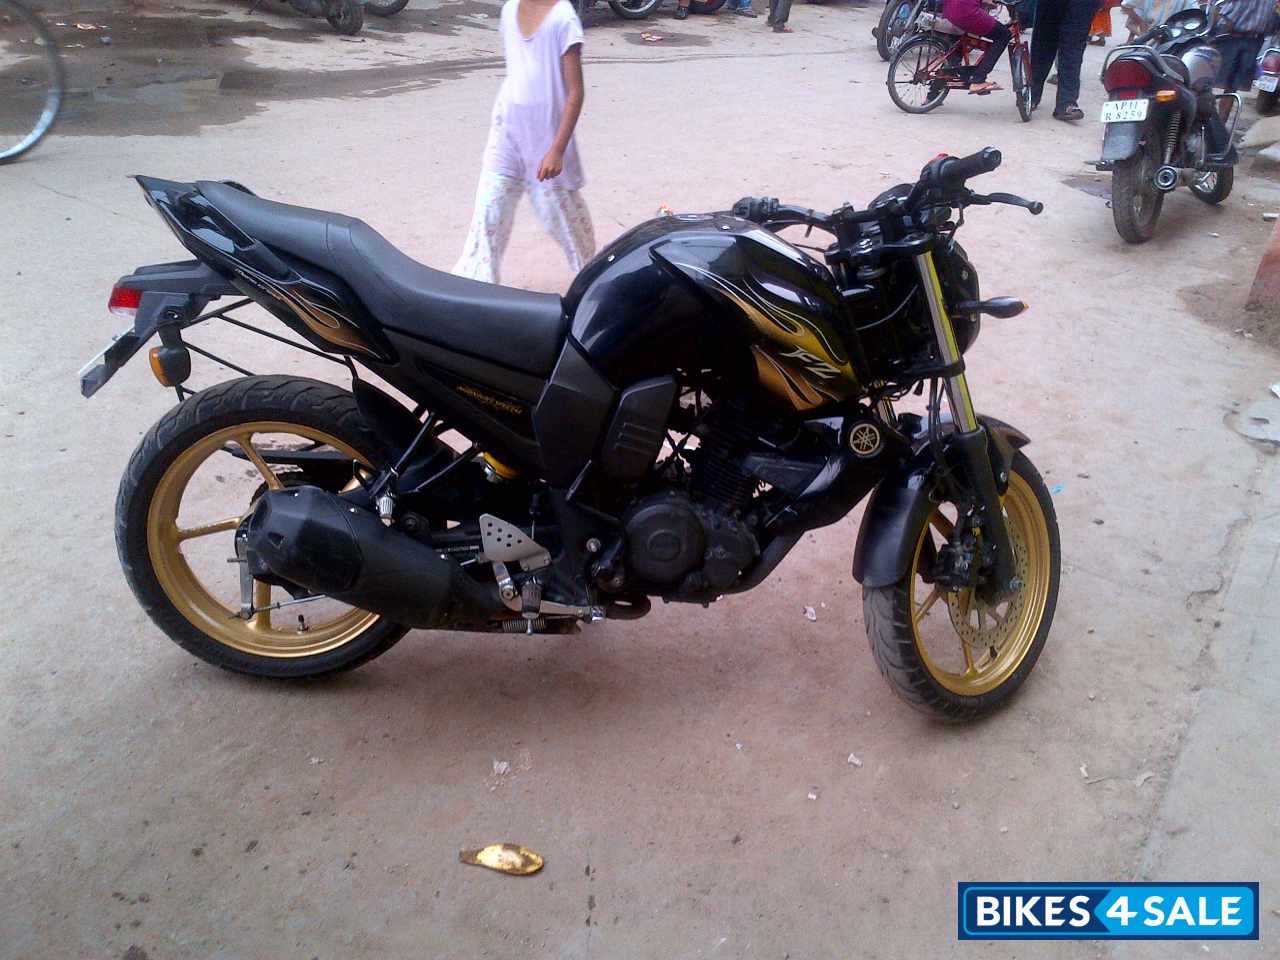 Used 2010 model Yamaha FZ16 for sale in Hyderabad. ID 82230 - Bikes4Sale